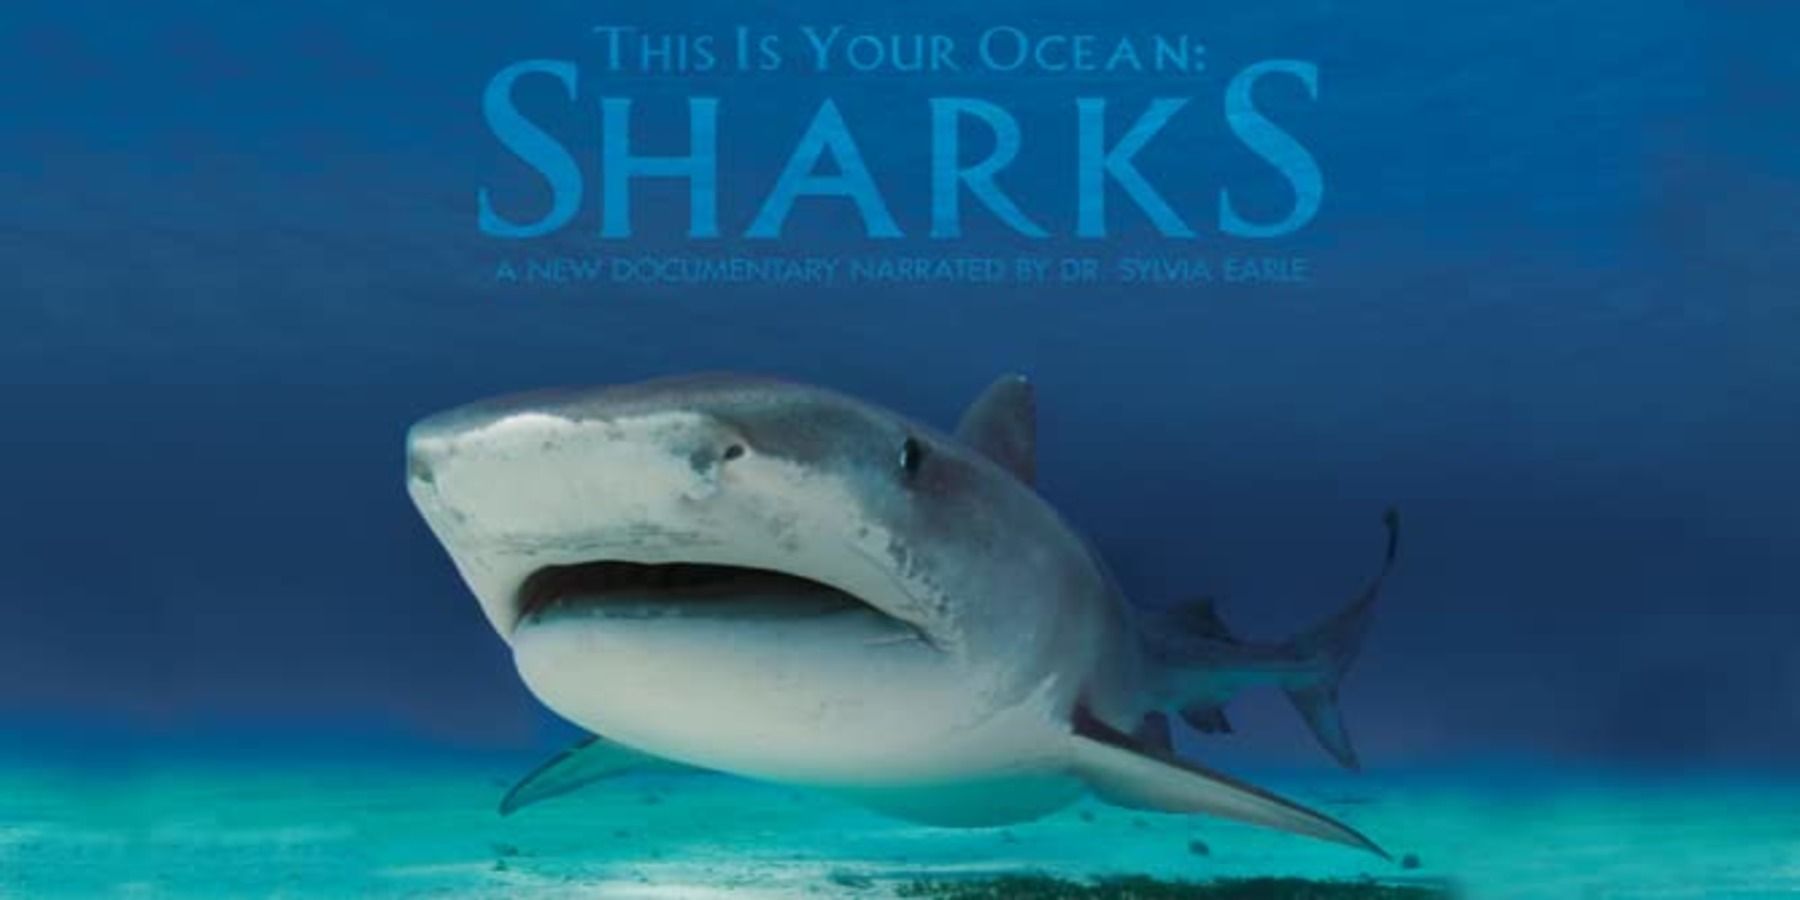 This Is Your Ocean Sharks (2012) title screen